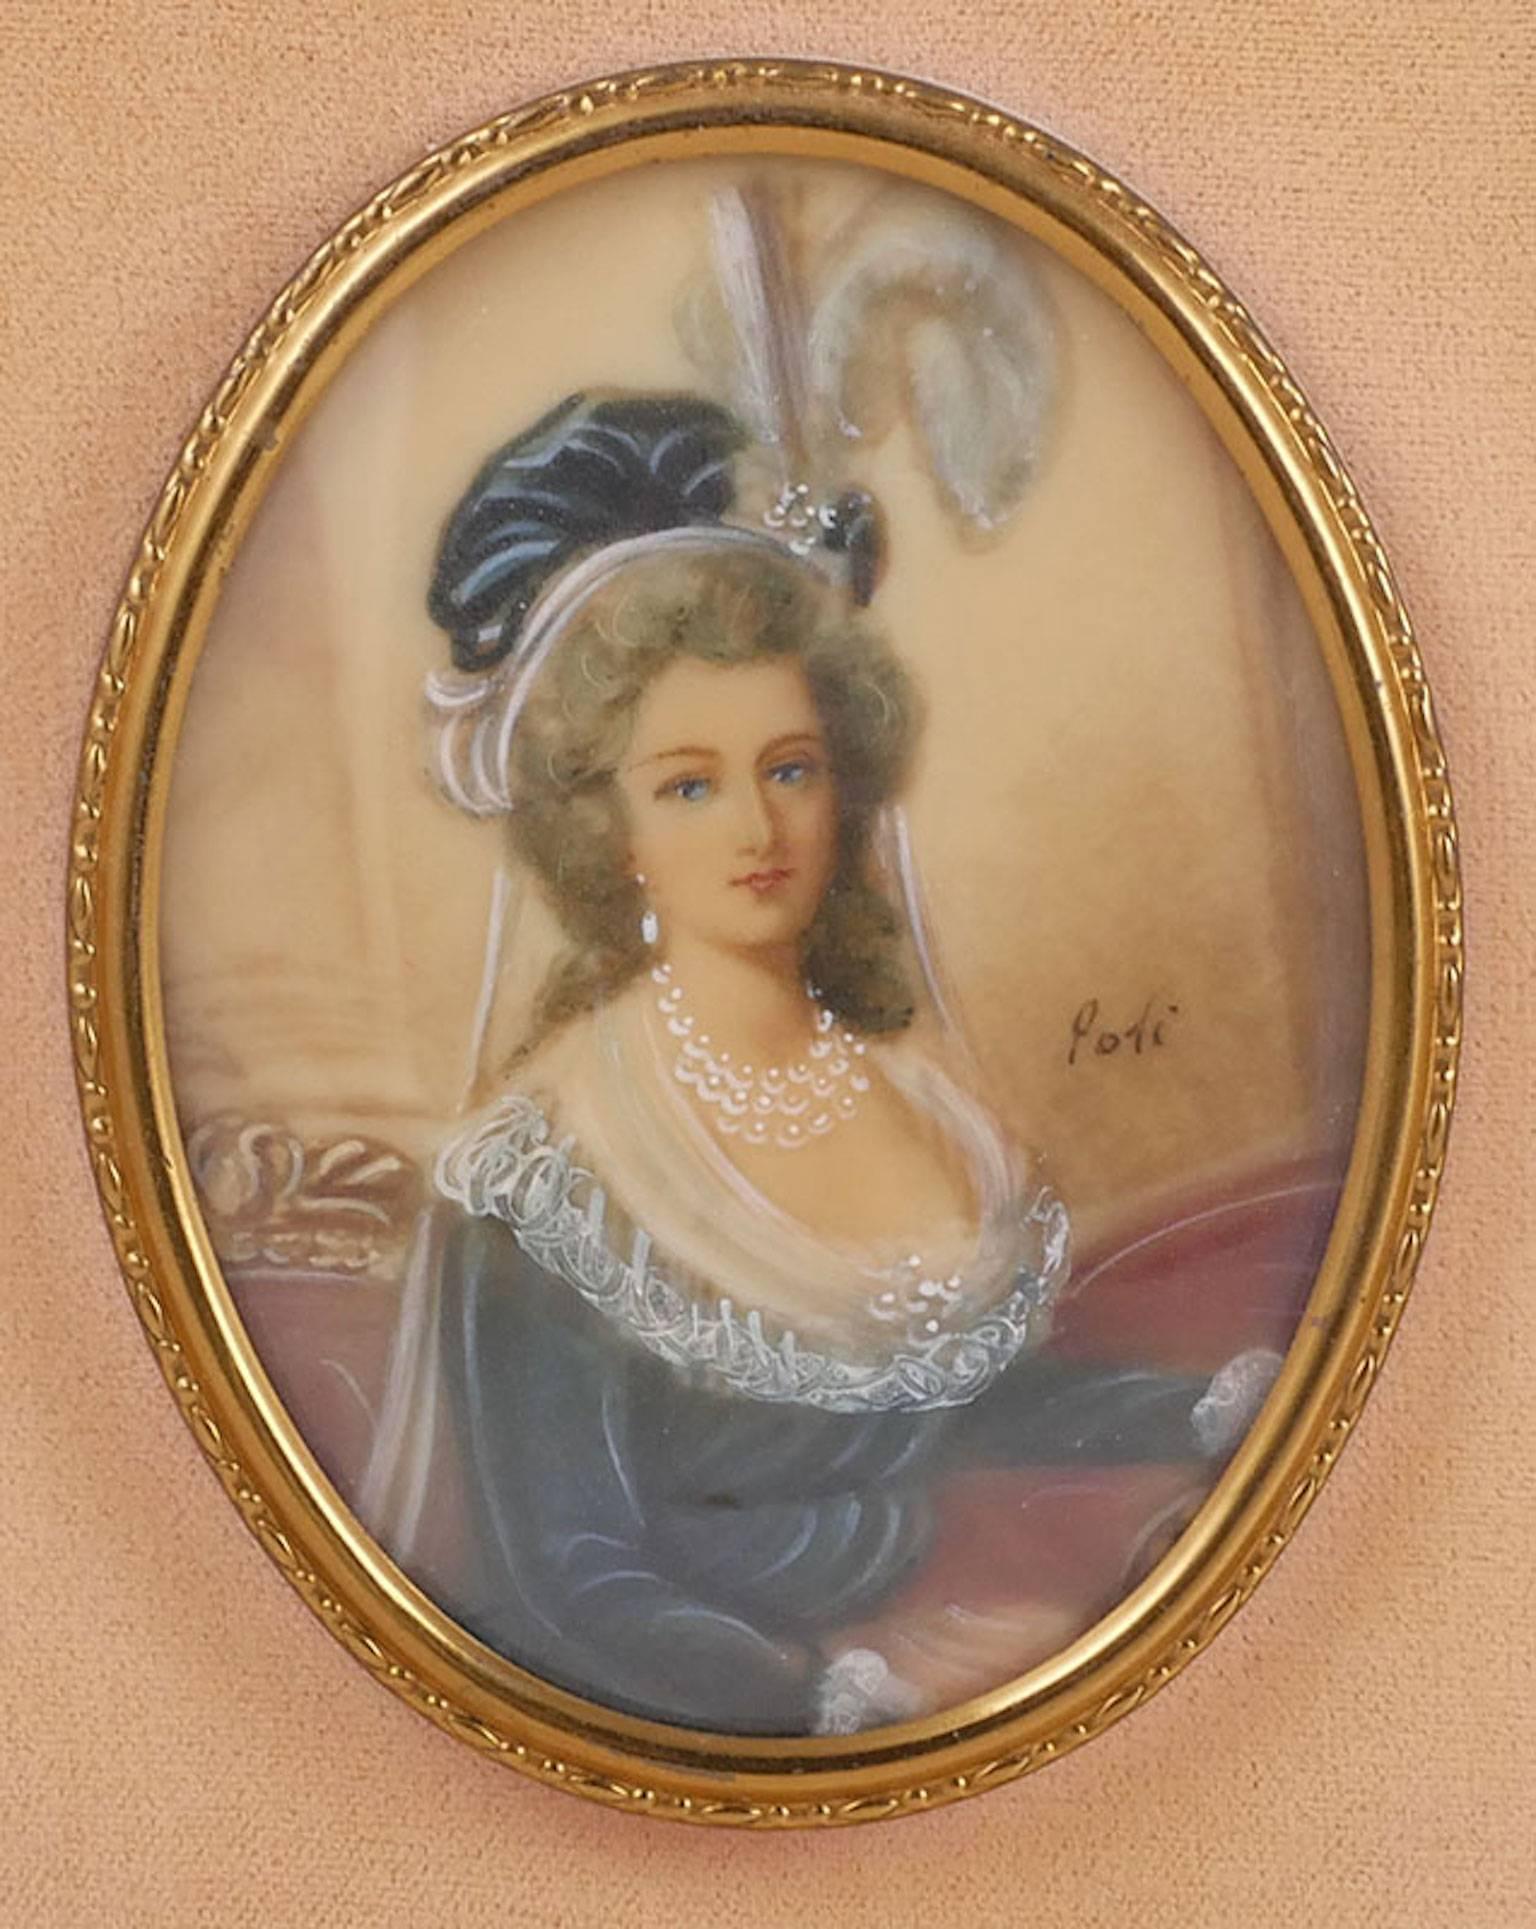 Two miniature portraits, hand-painted on natural material, each measuring about 3 inches high and signed.
Information on back indicates that one portrait is of Lady Dacres, circa 1820, the other of Countess of Roxburgh, circa 1810. Framed in